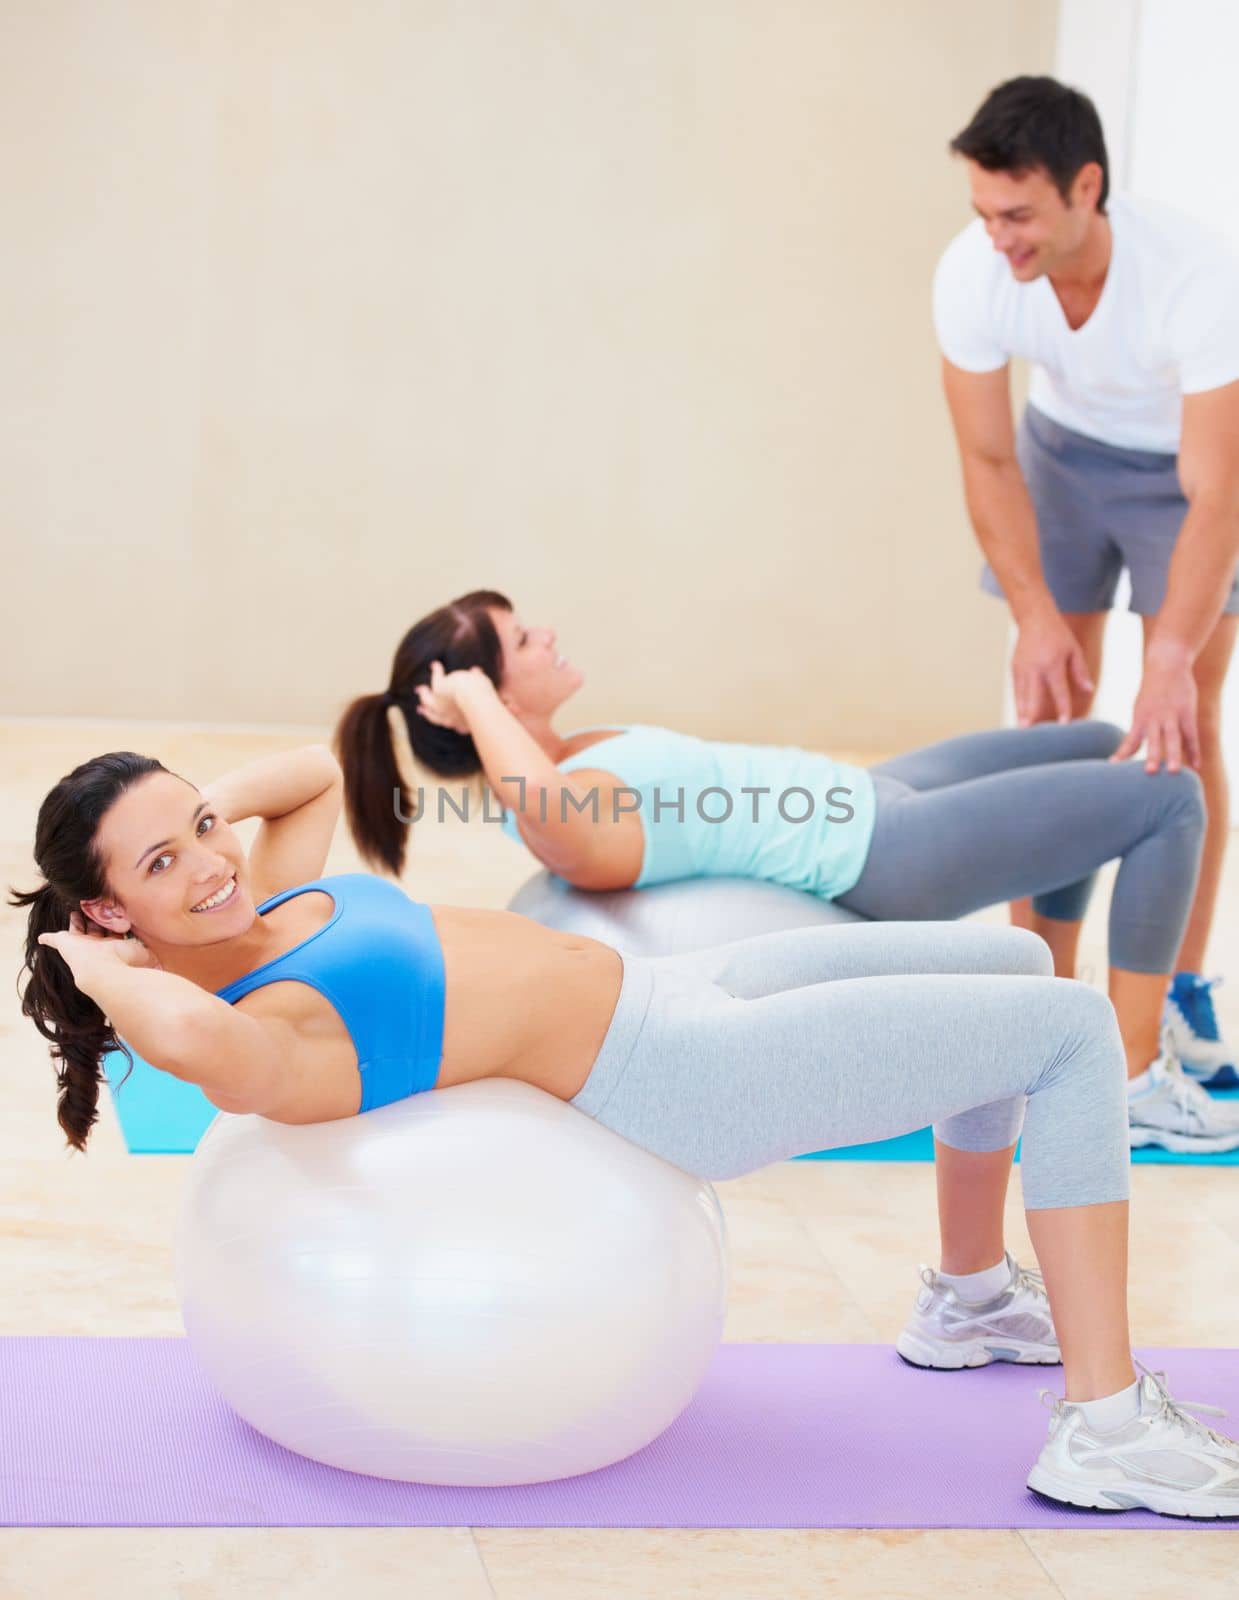 She knows her workouts will pay off. Young woman doing a sit up during a pilates class with the help of an instructor